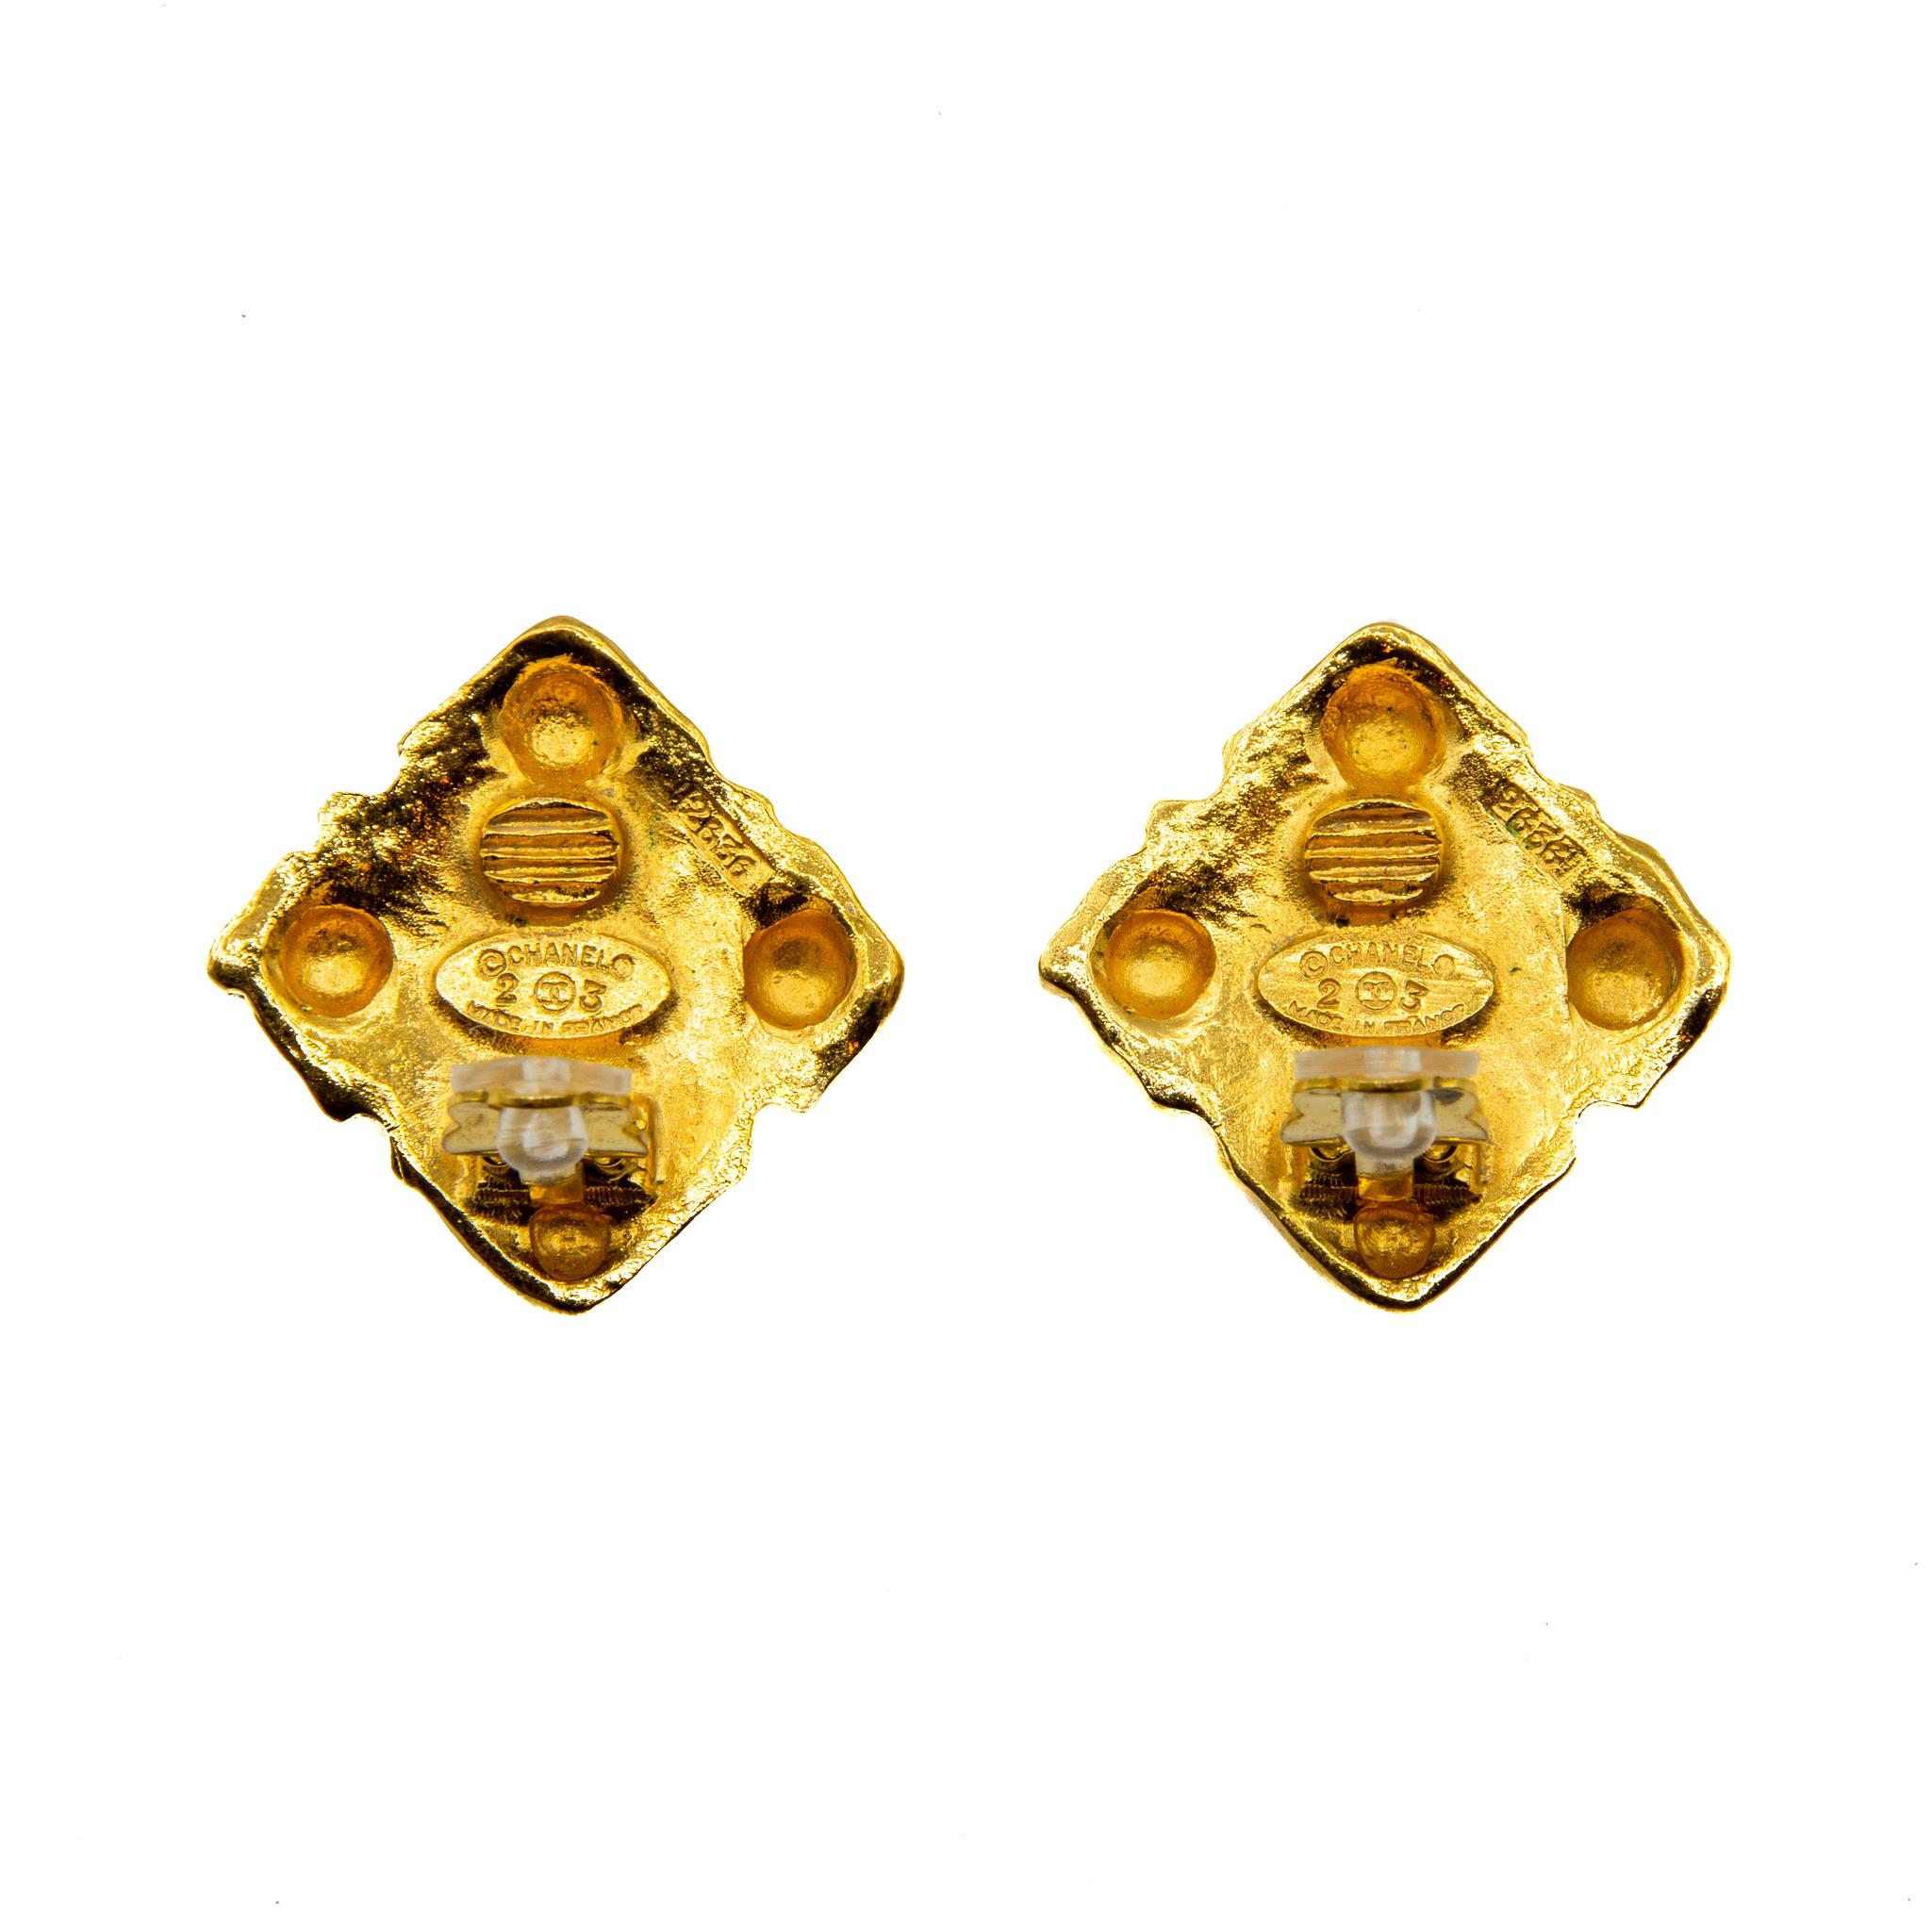 1980s Collection 23 Chanel Clip-on Earrings. In gold coloured gilt metal pressed with 12 circular domes wrapped around a faux pearl and 4 geometric patterned domes on each corner of the square shape. This piece carries the Chanel authenticity